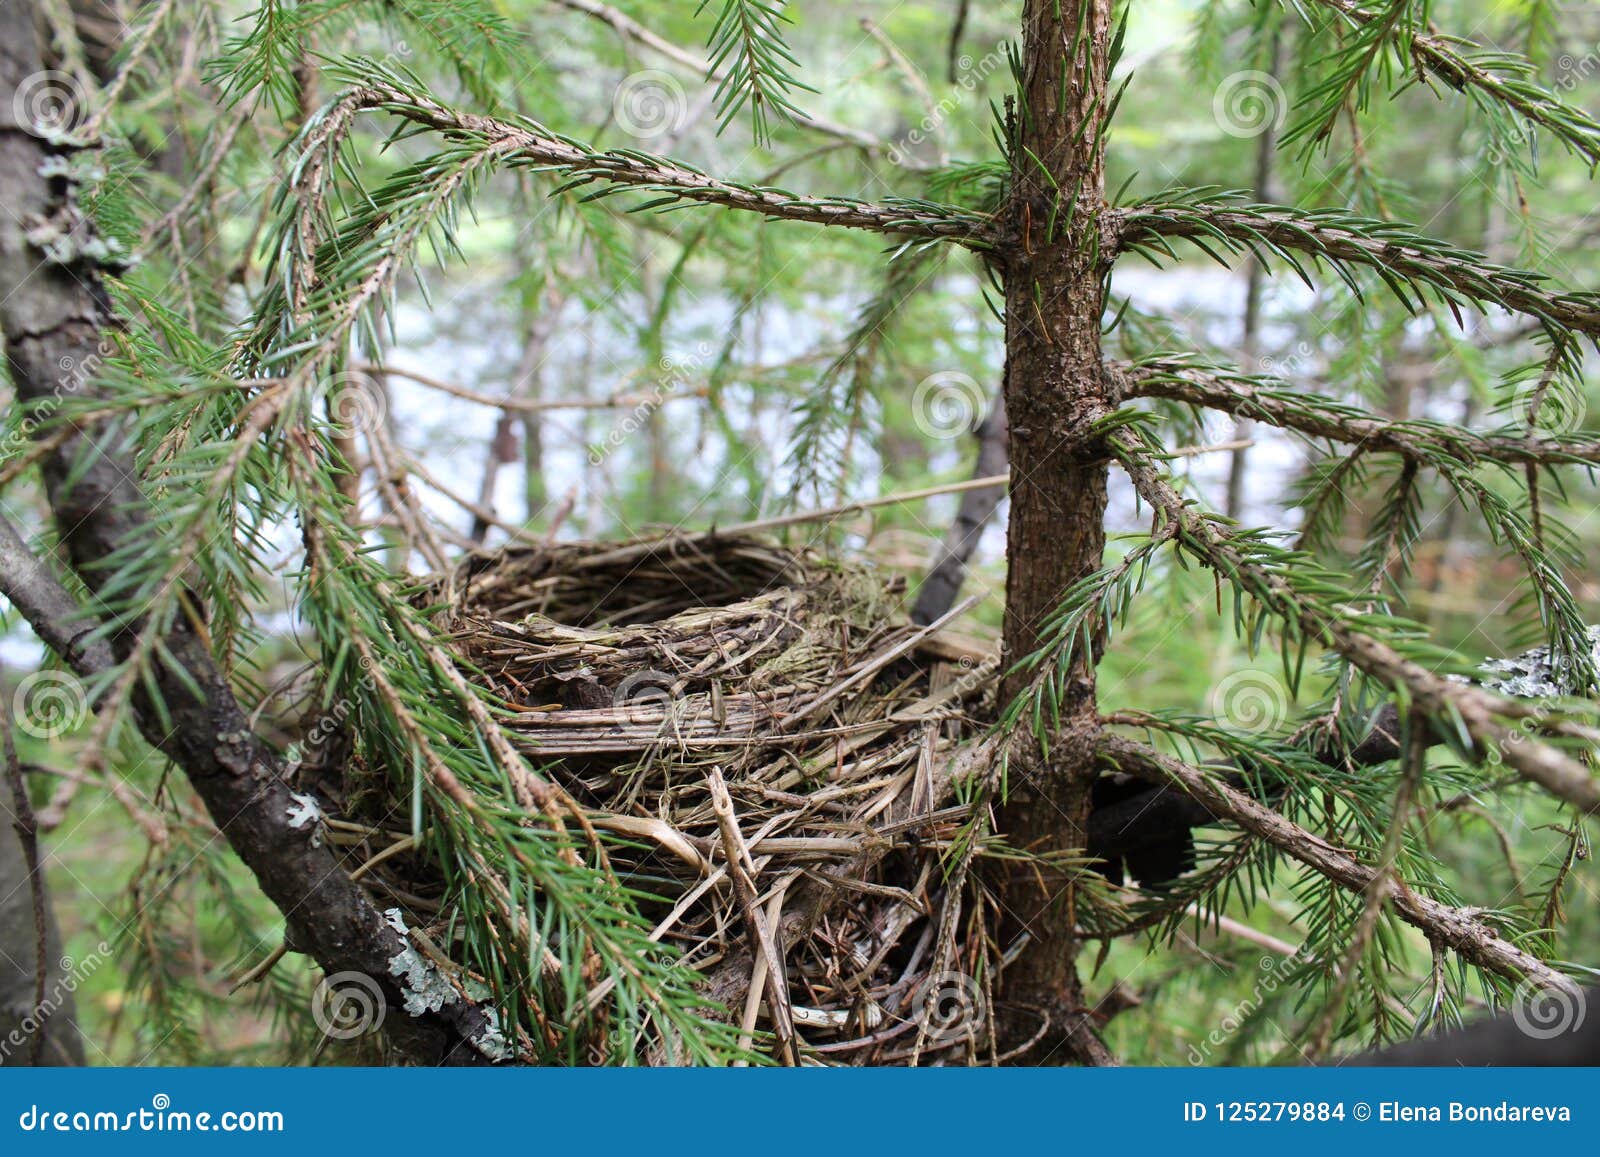 Nest Made by a Bird in the Forest from Branches. Stock Photo - Image of